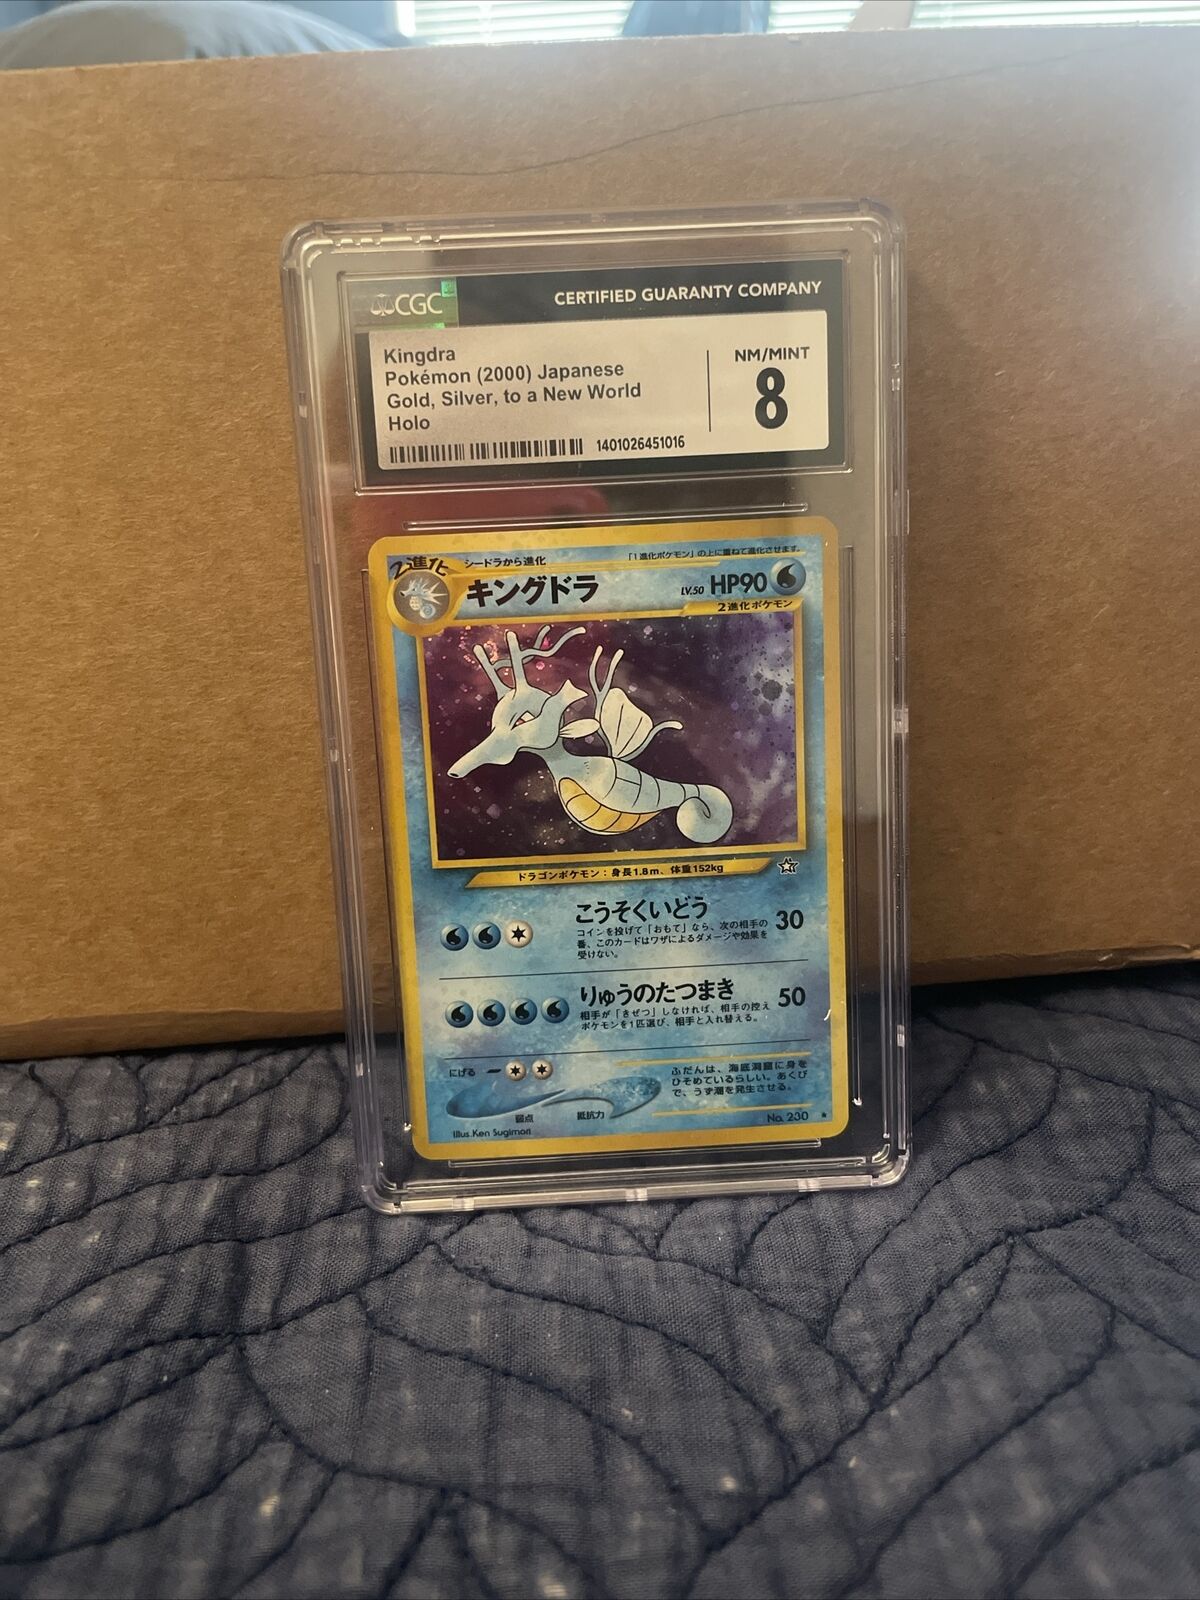 2000 Pokemon Japanese Gold Silver To A New World Kingdra - Holo CGC 8 NM-MT